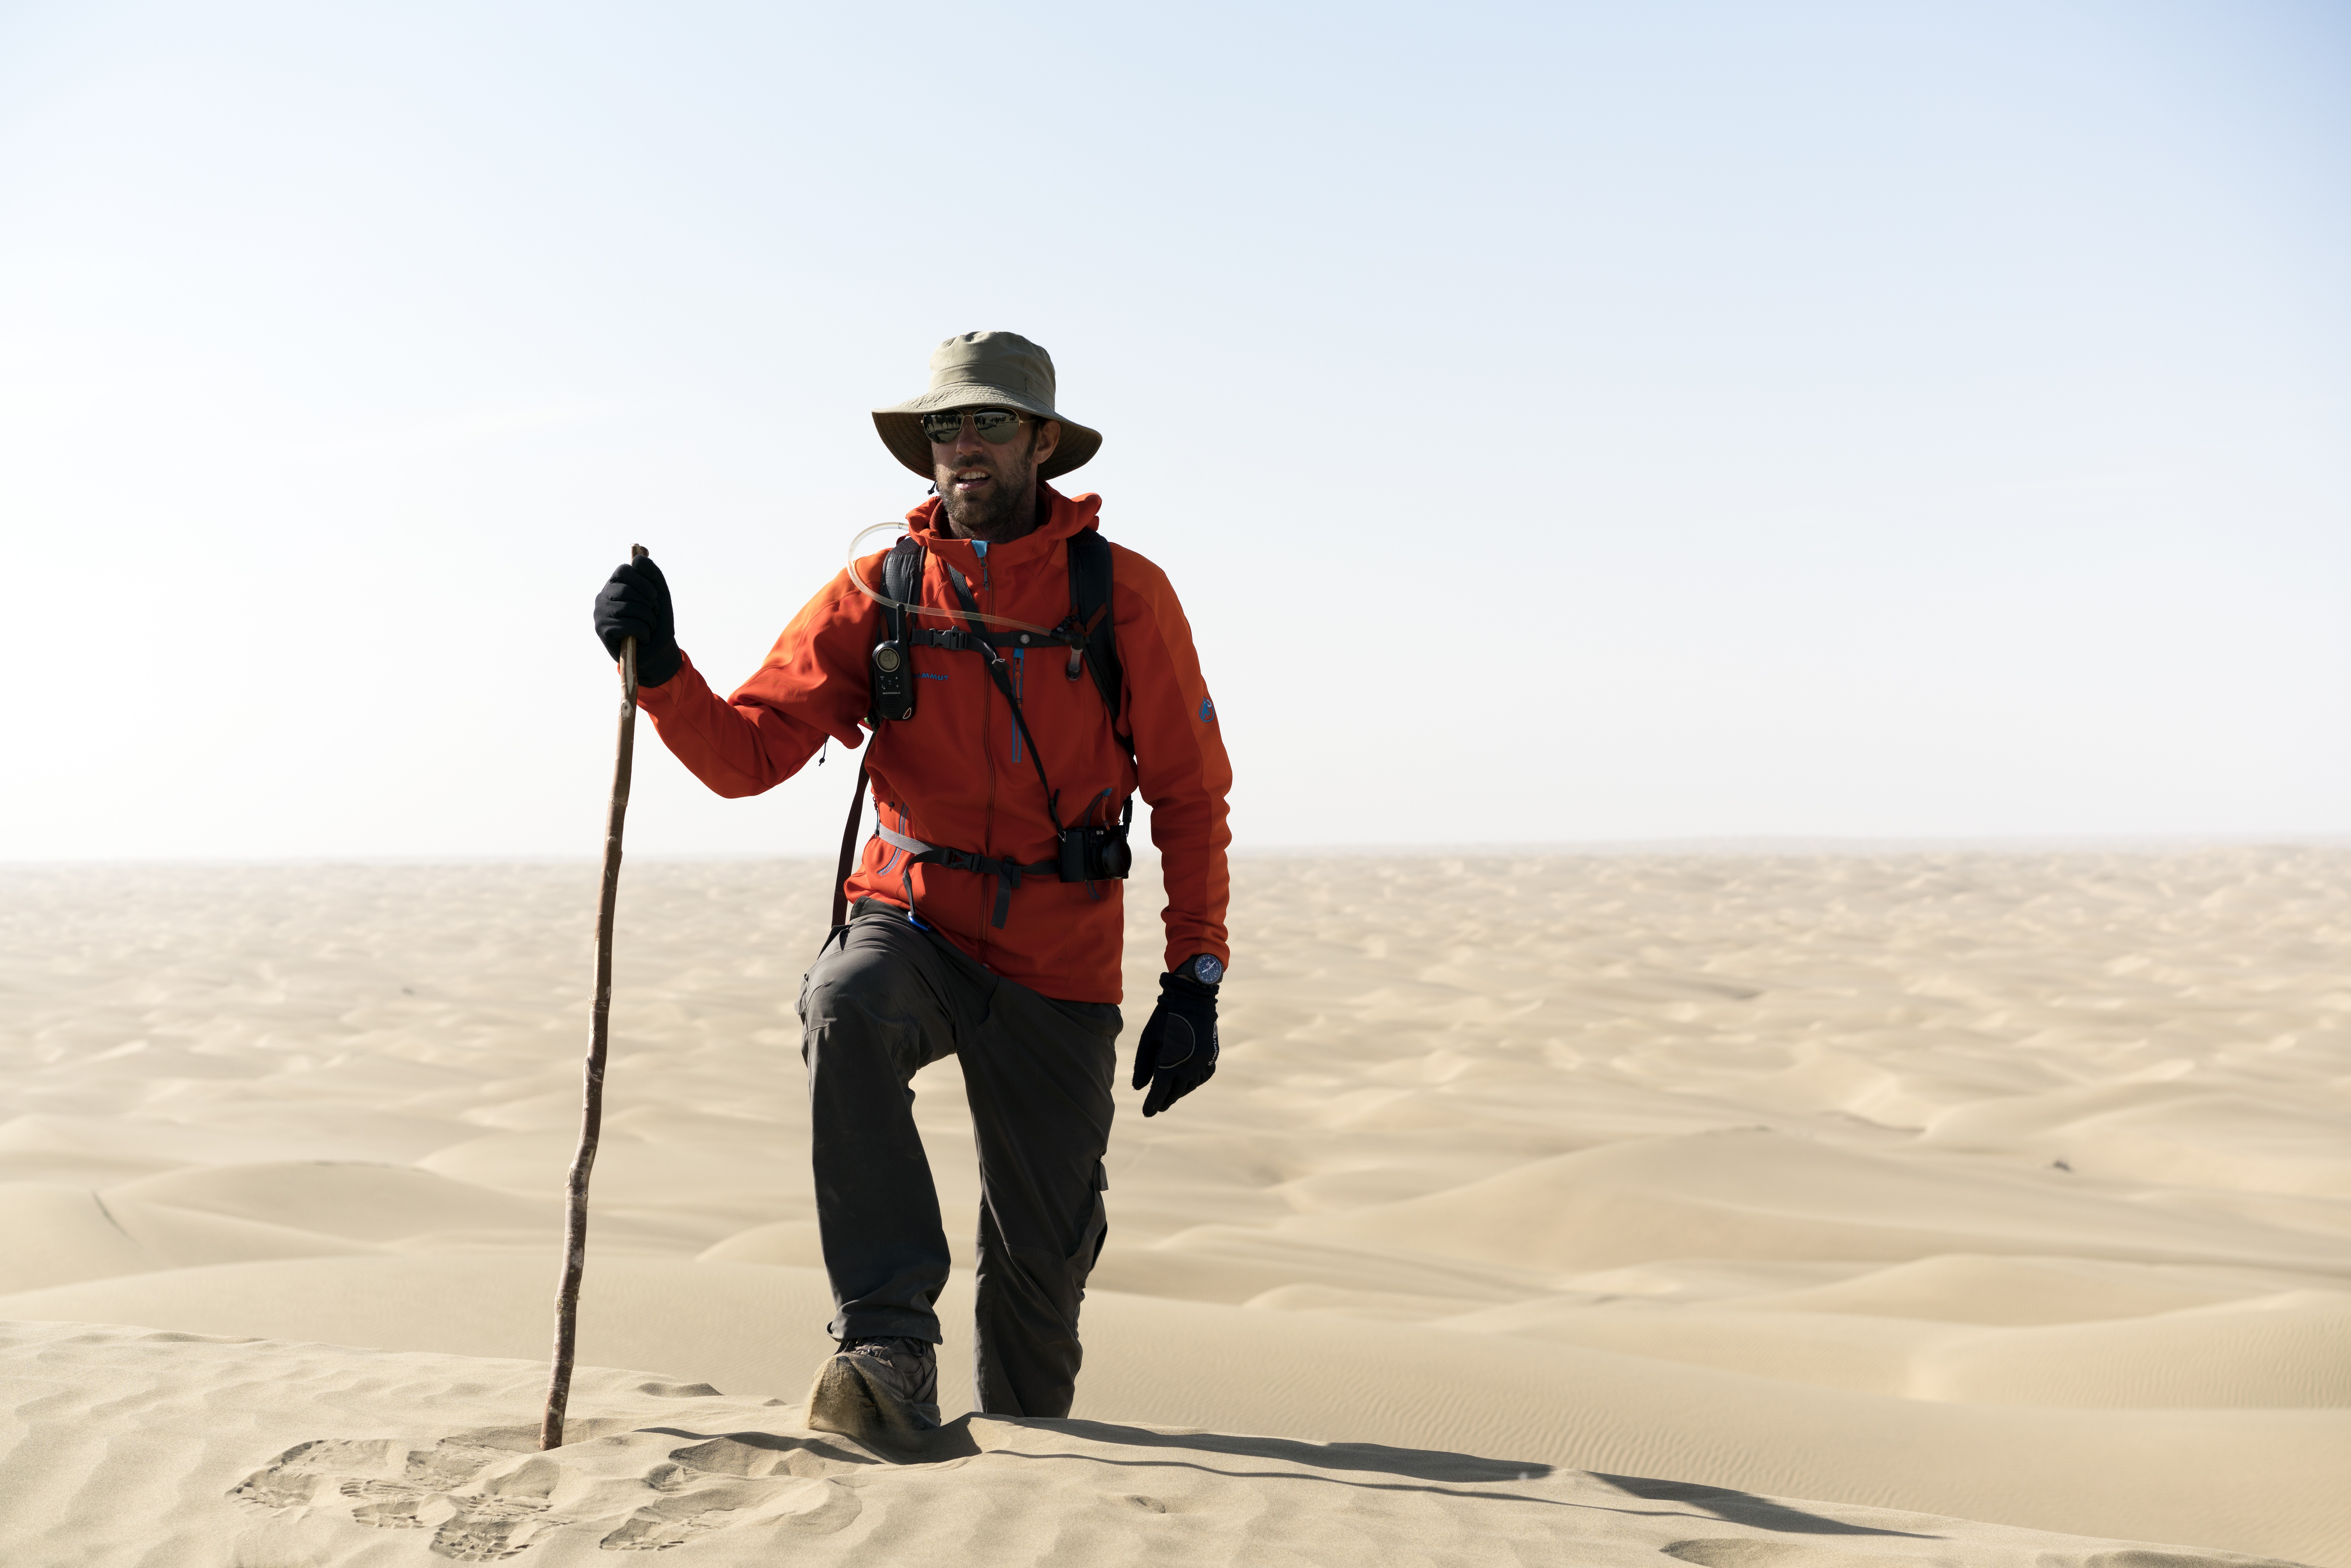 Ryan Pyle treks through the Taklamakan Desert in China while filming his television series Extreme Treks on BBC Earth.